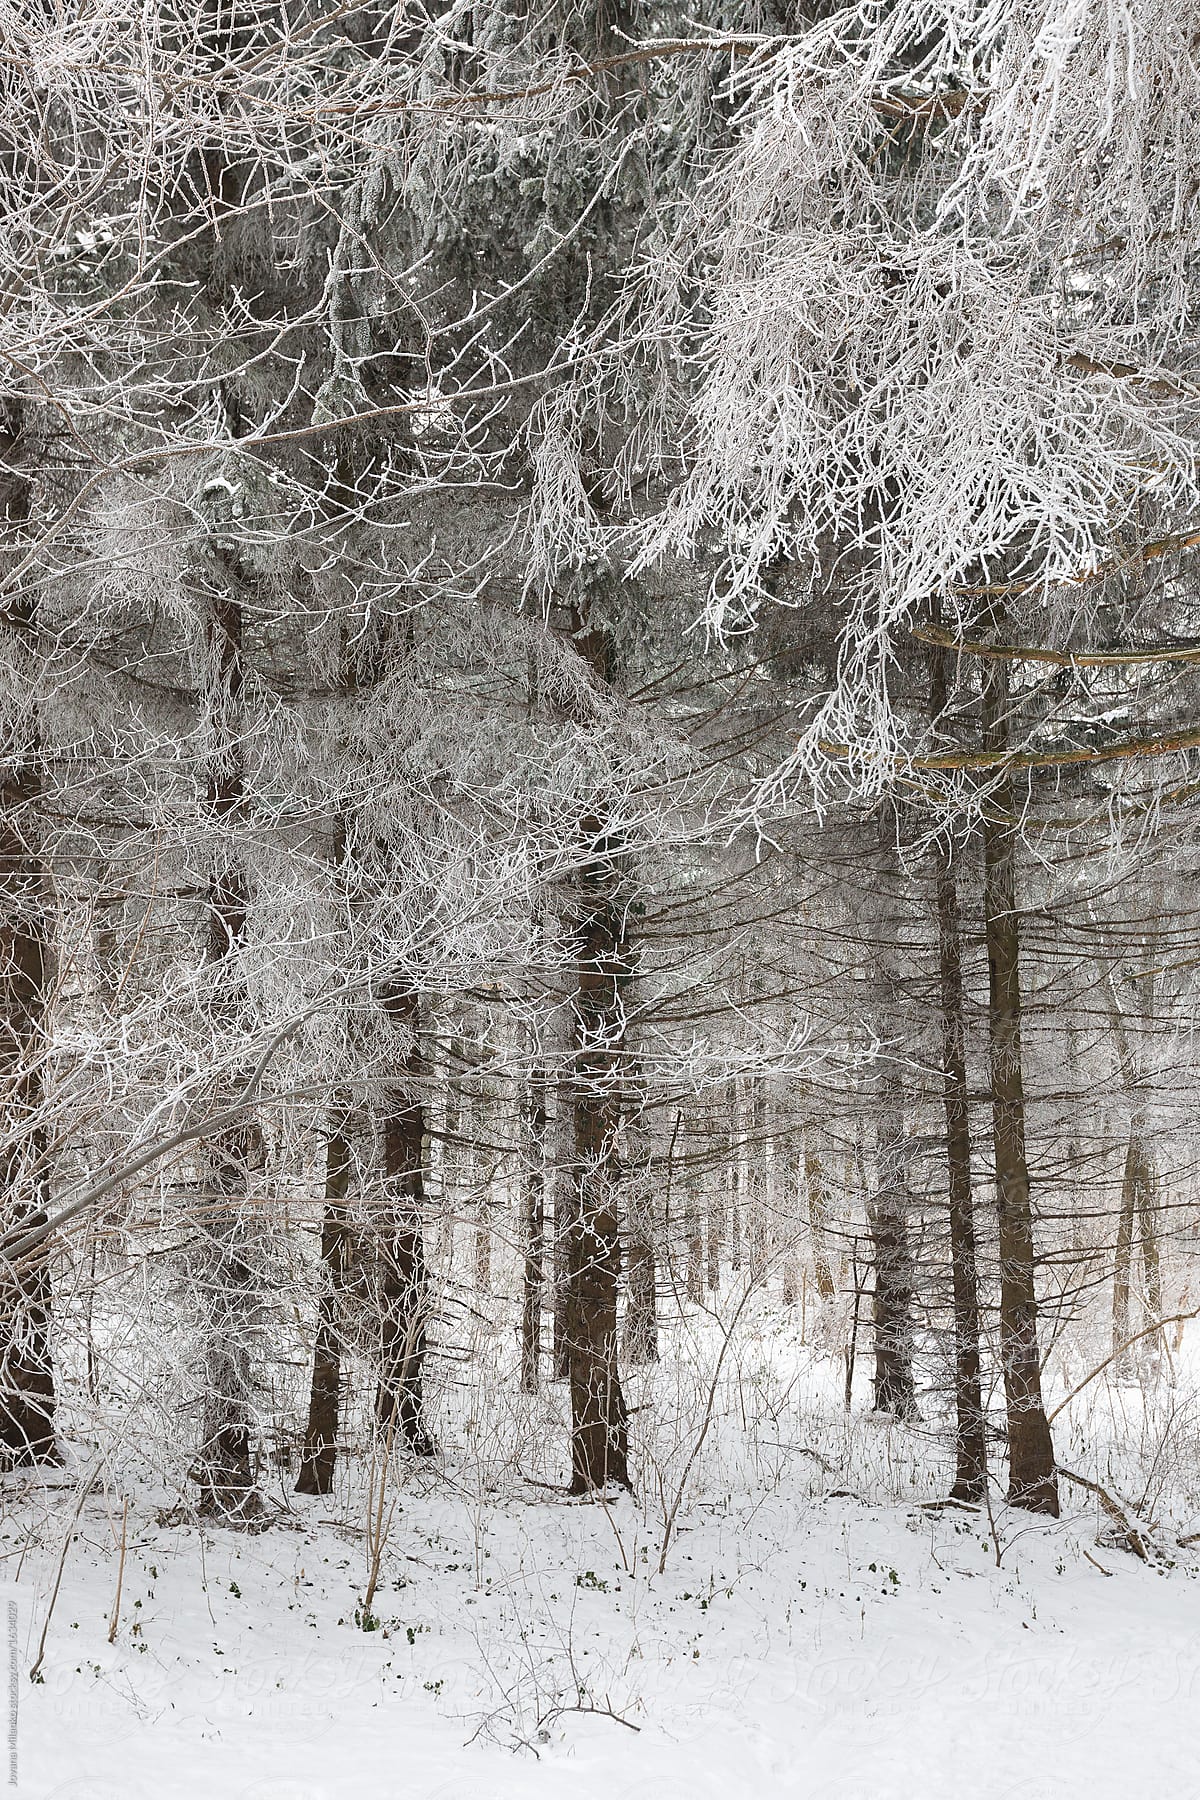 Forest frozen and covered in snow in the wintertime